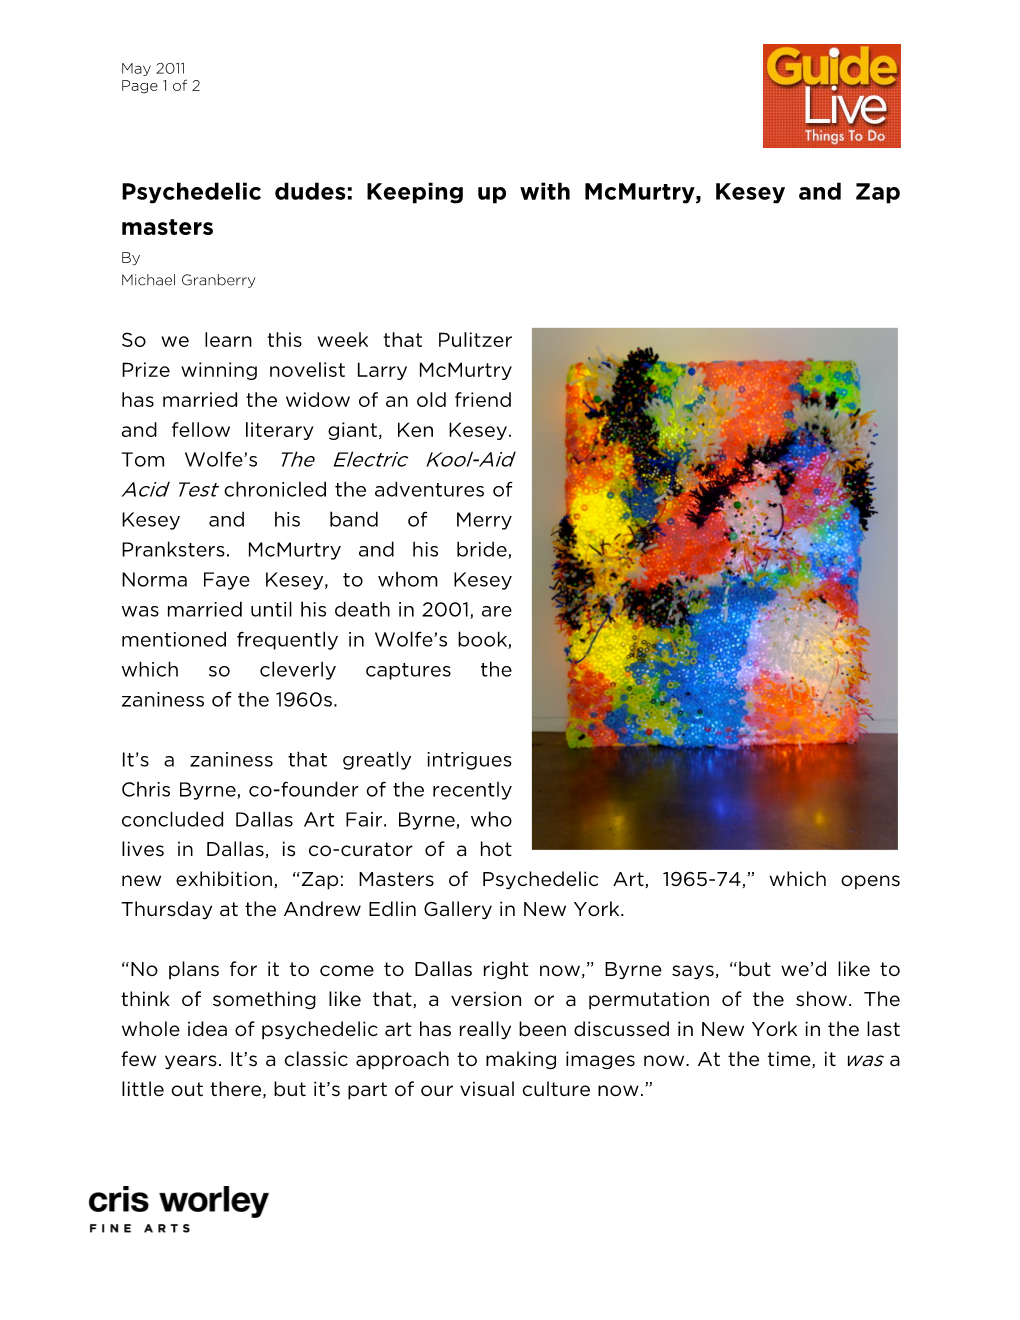 Psychedelic Dudes: Keeping up with Mcmurtry, Kesey and Zap Masters by Michael Granberry